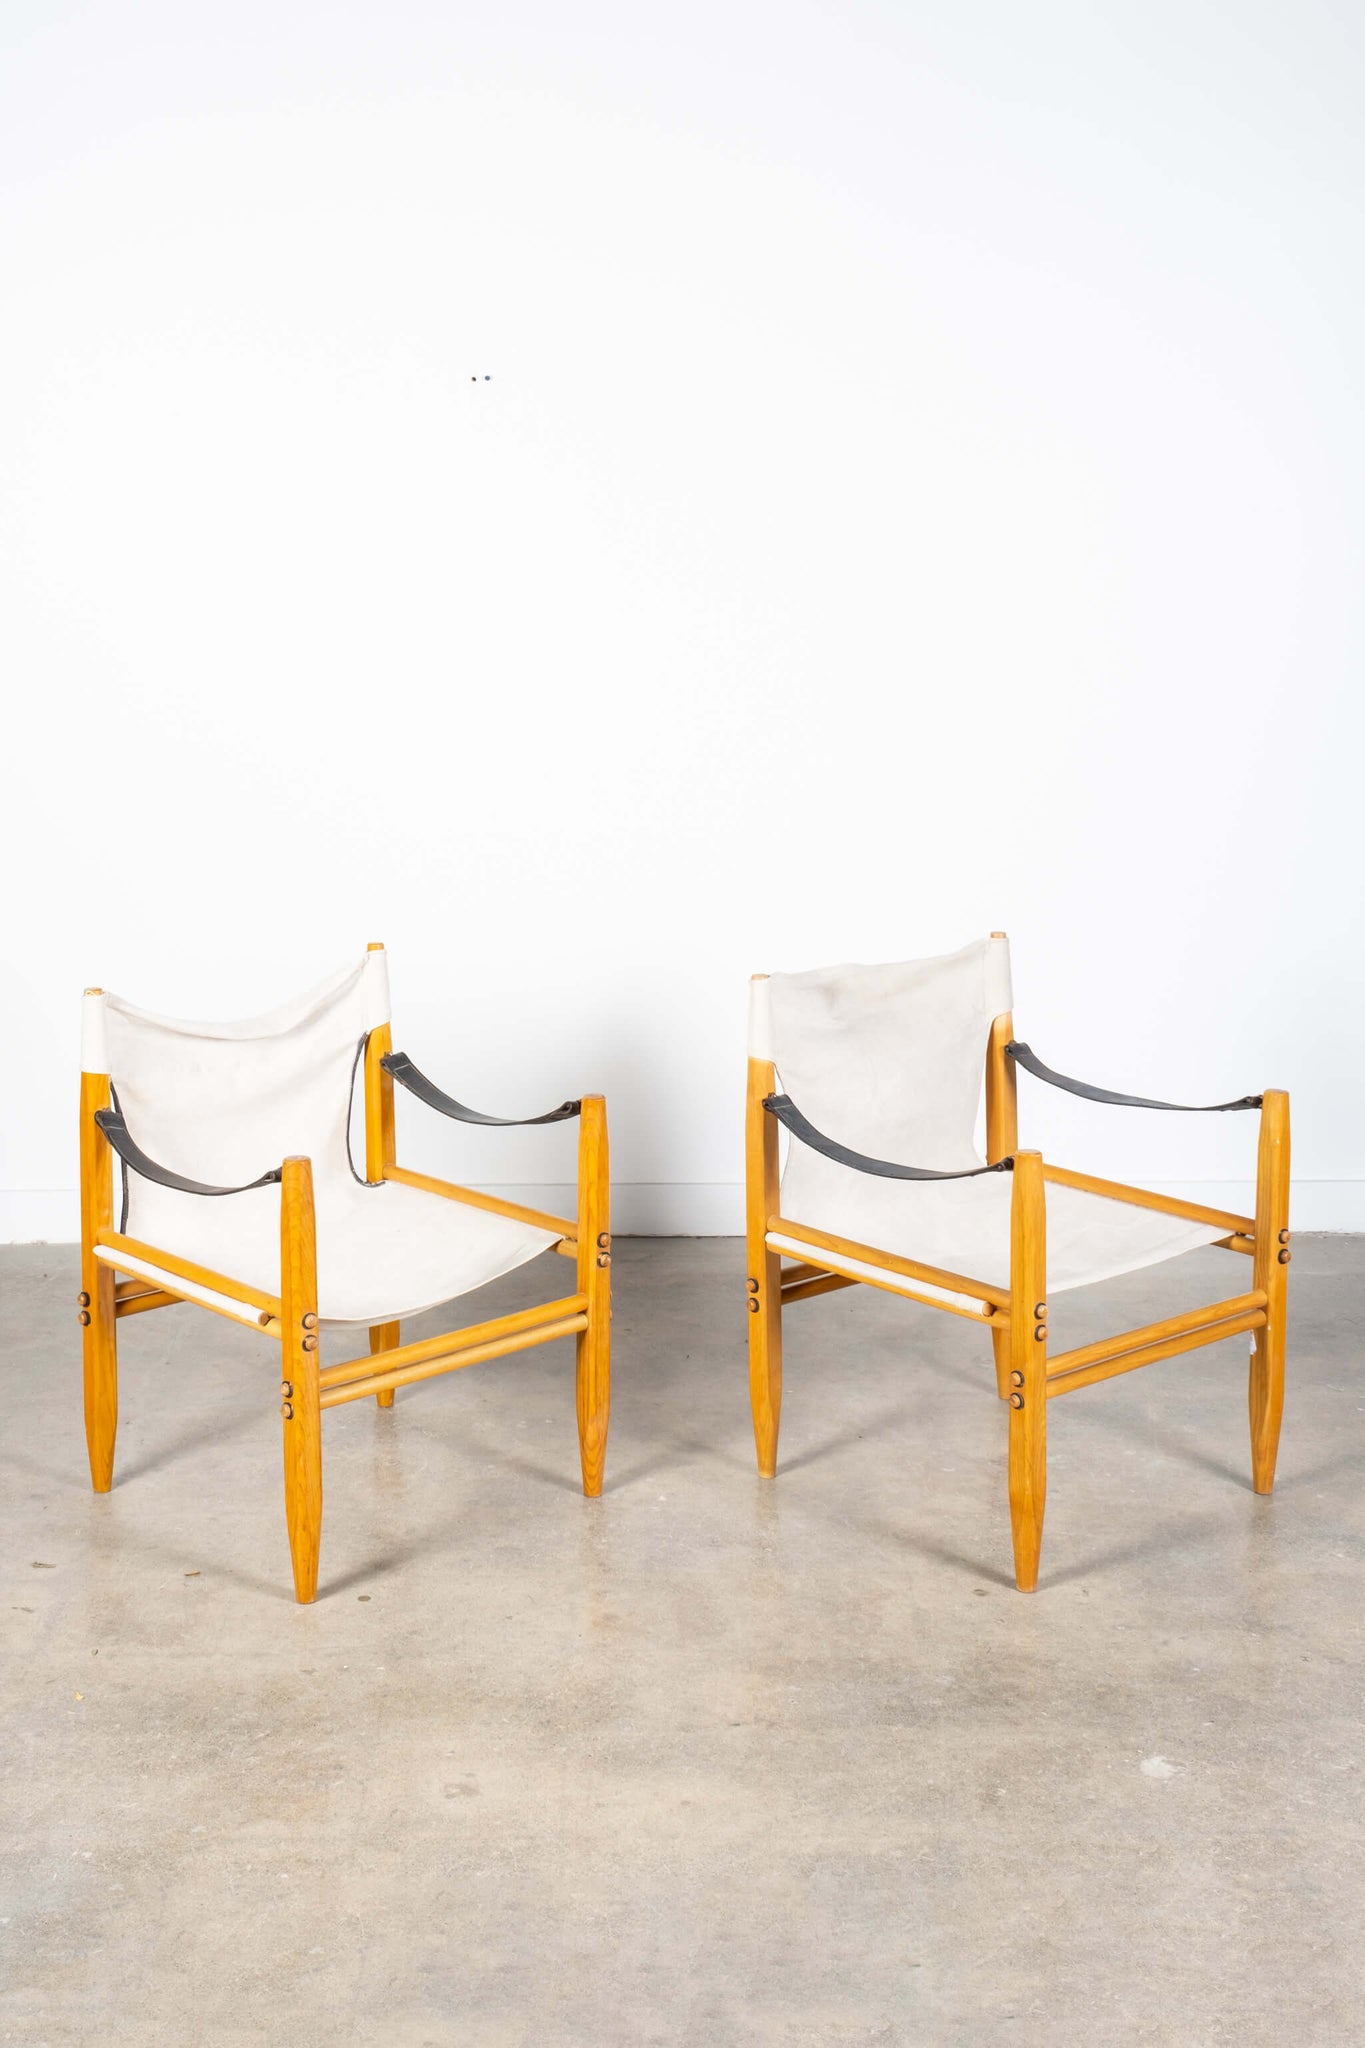 Vintage Oasi 85 Safari Chairs in White Fabric & Light Wood, shown side by side, angled front view